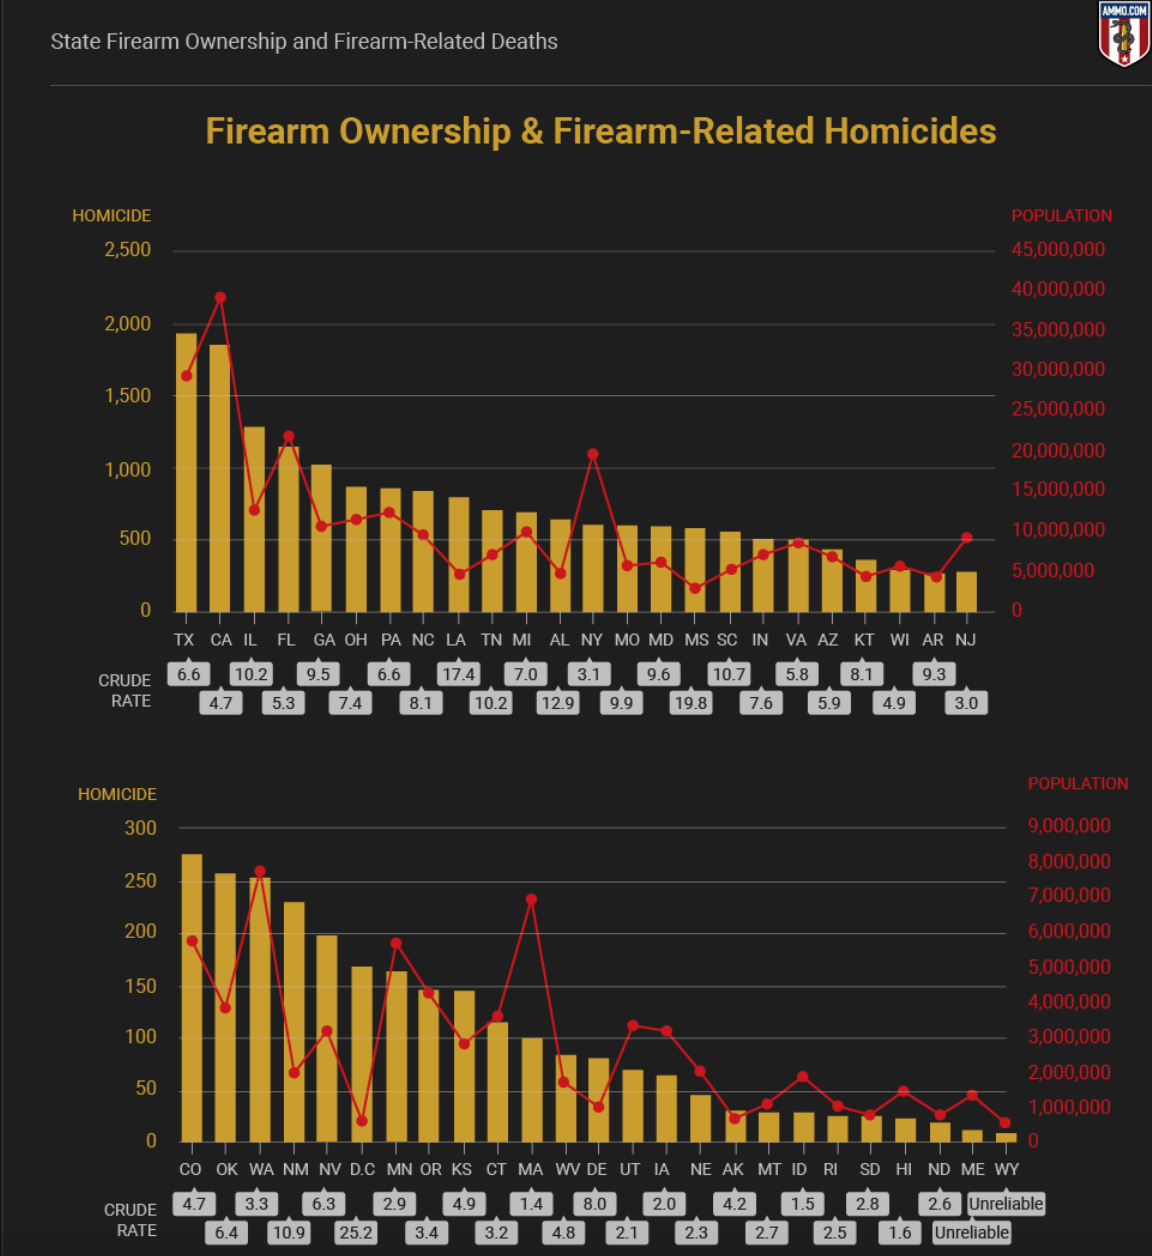 Firearm ownership and firearm-related homicides; graphic courtesy of author.